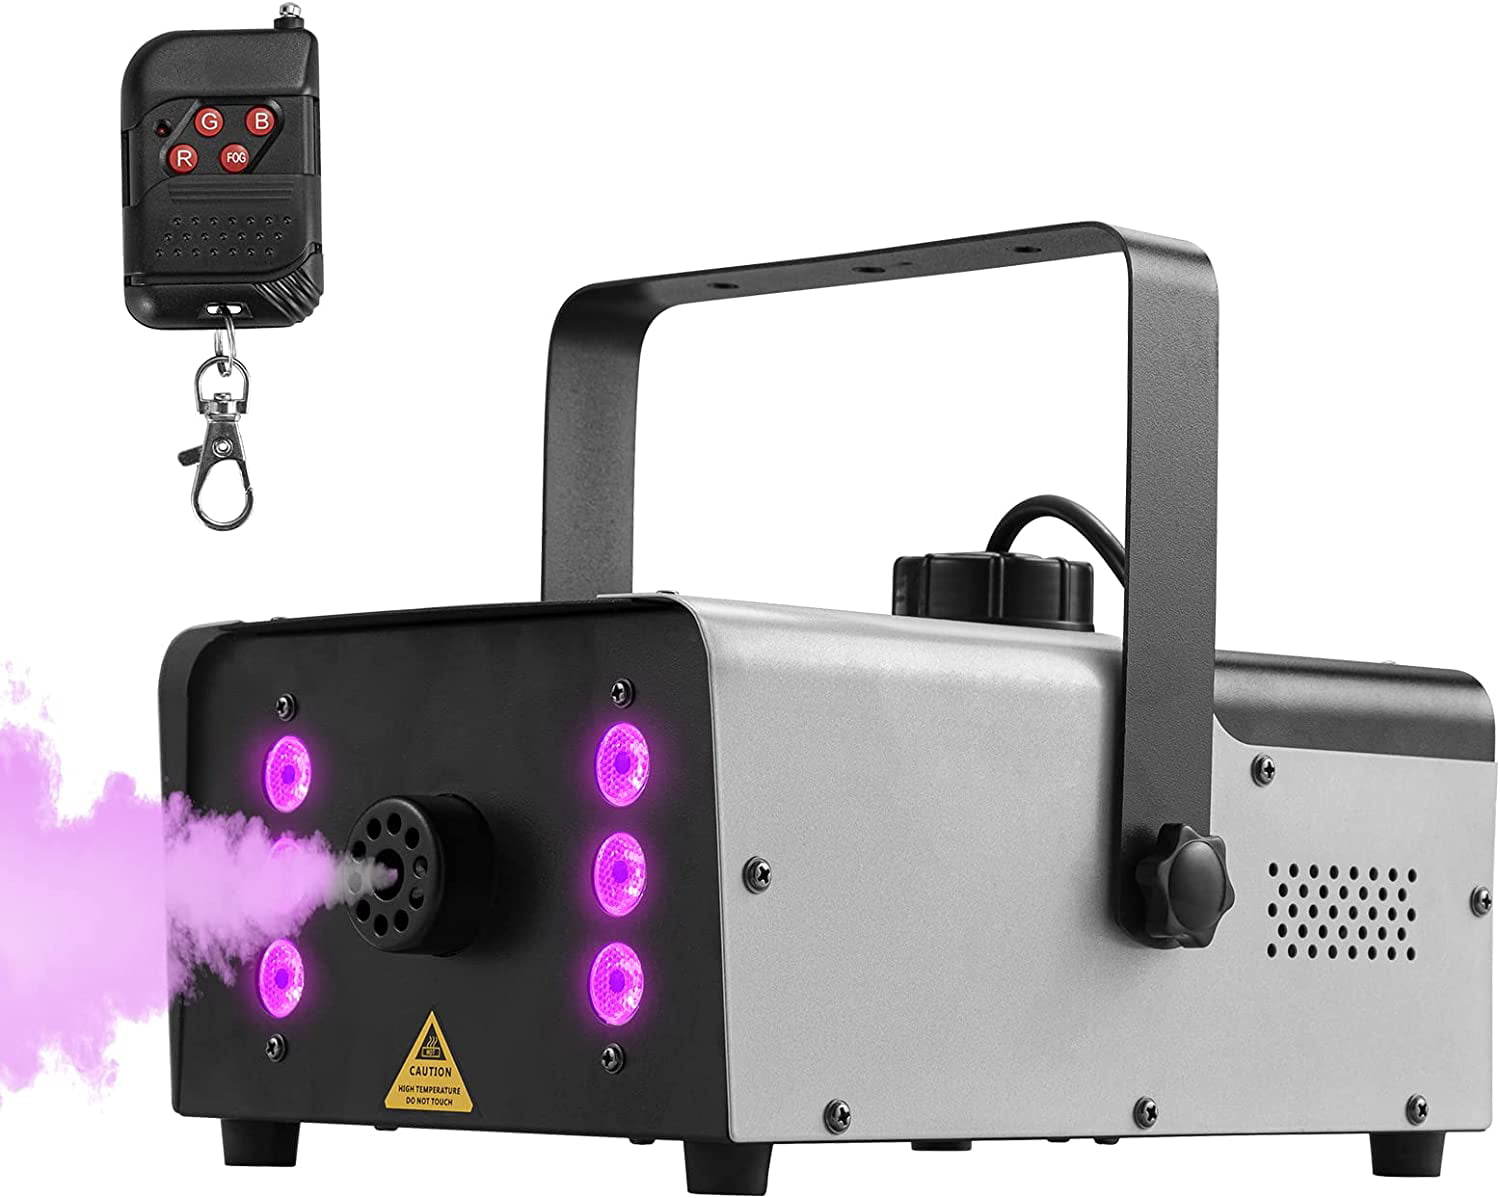 Halloween,Parties or Weddings,with Fuse Protection Fog Machine JDR Smoke Mini Machine 13 Colorful LED Light 600W and 3500CFM with Wireless Remote Control and Automatic spray for Disinfection 